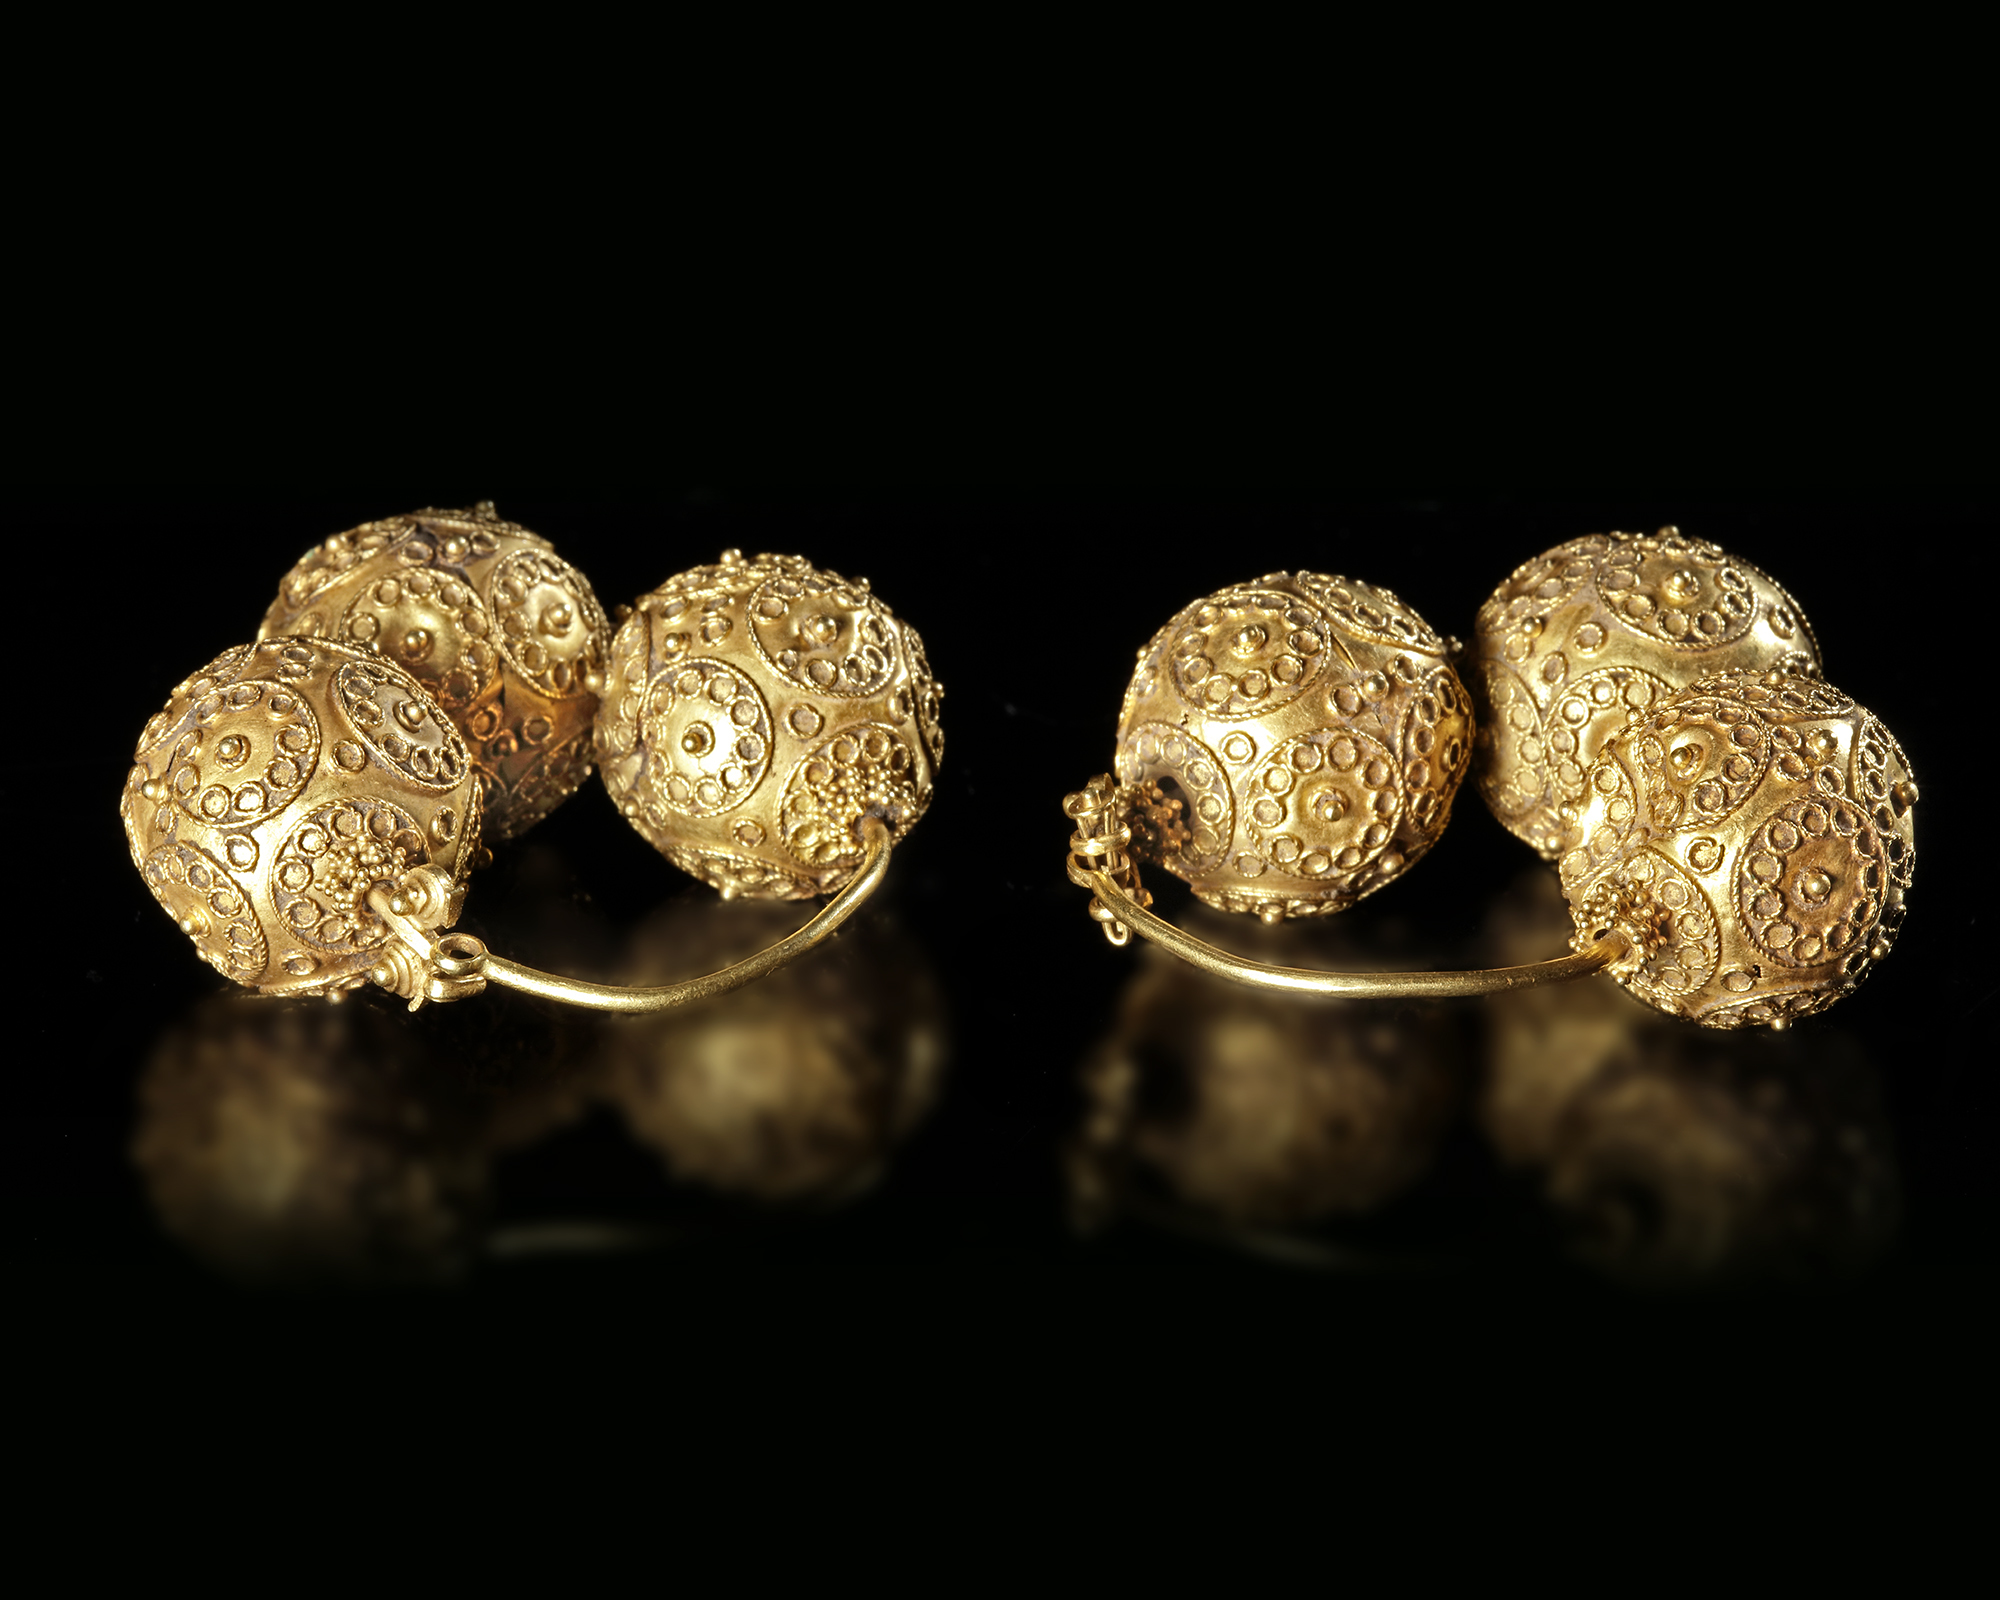 A PAIR OF EARLY ISLAMIC GOLD EARRINGS, 12TH CENTURY - Image 6 of 6